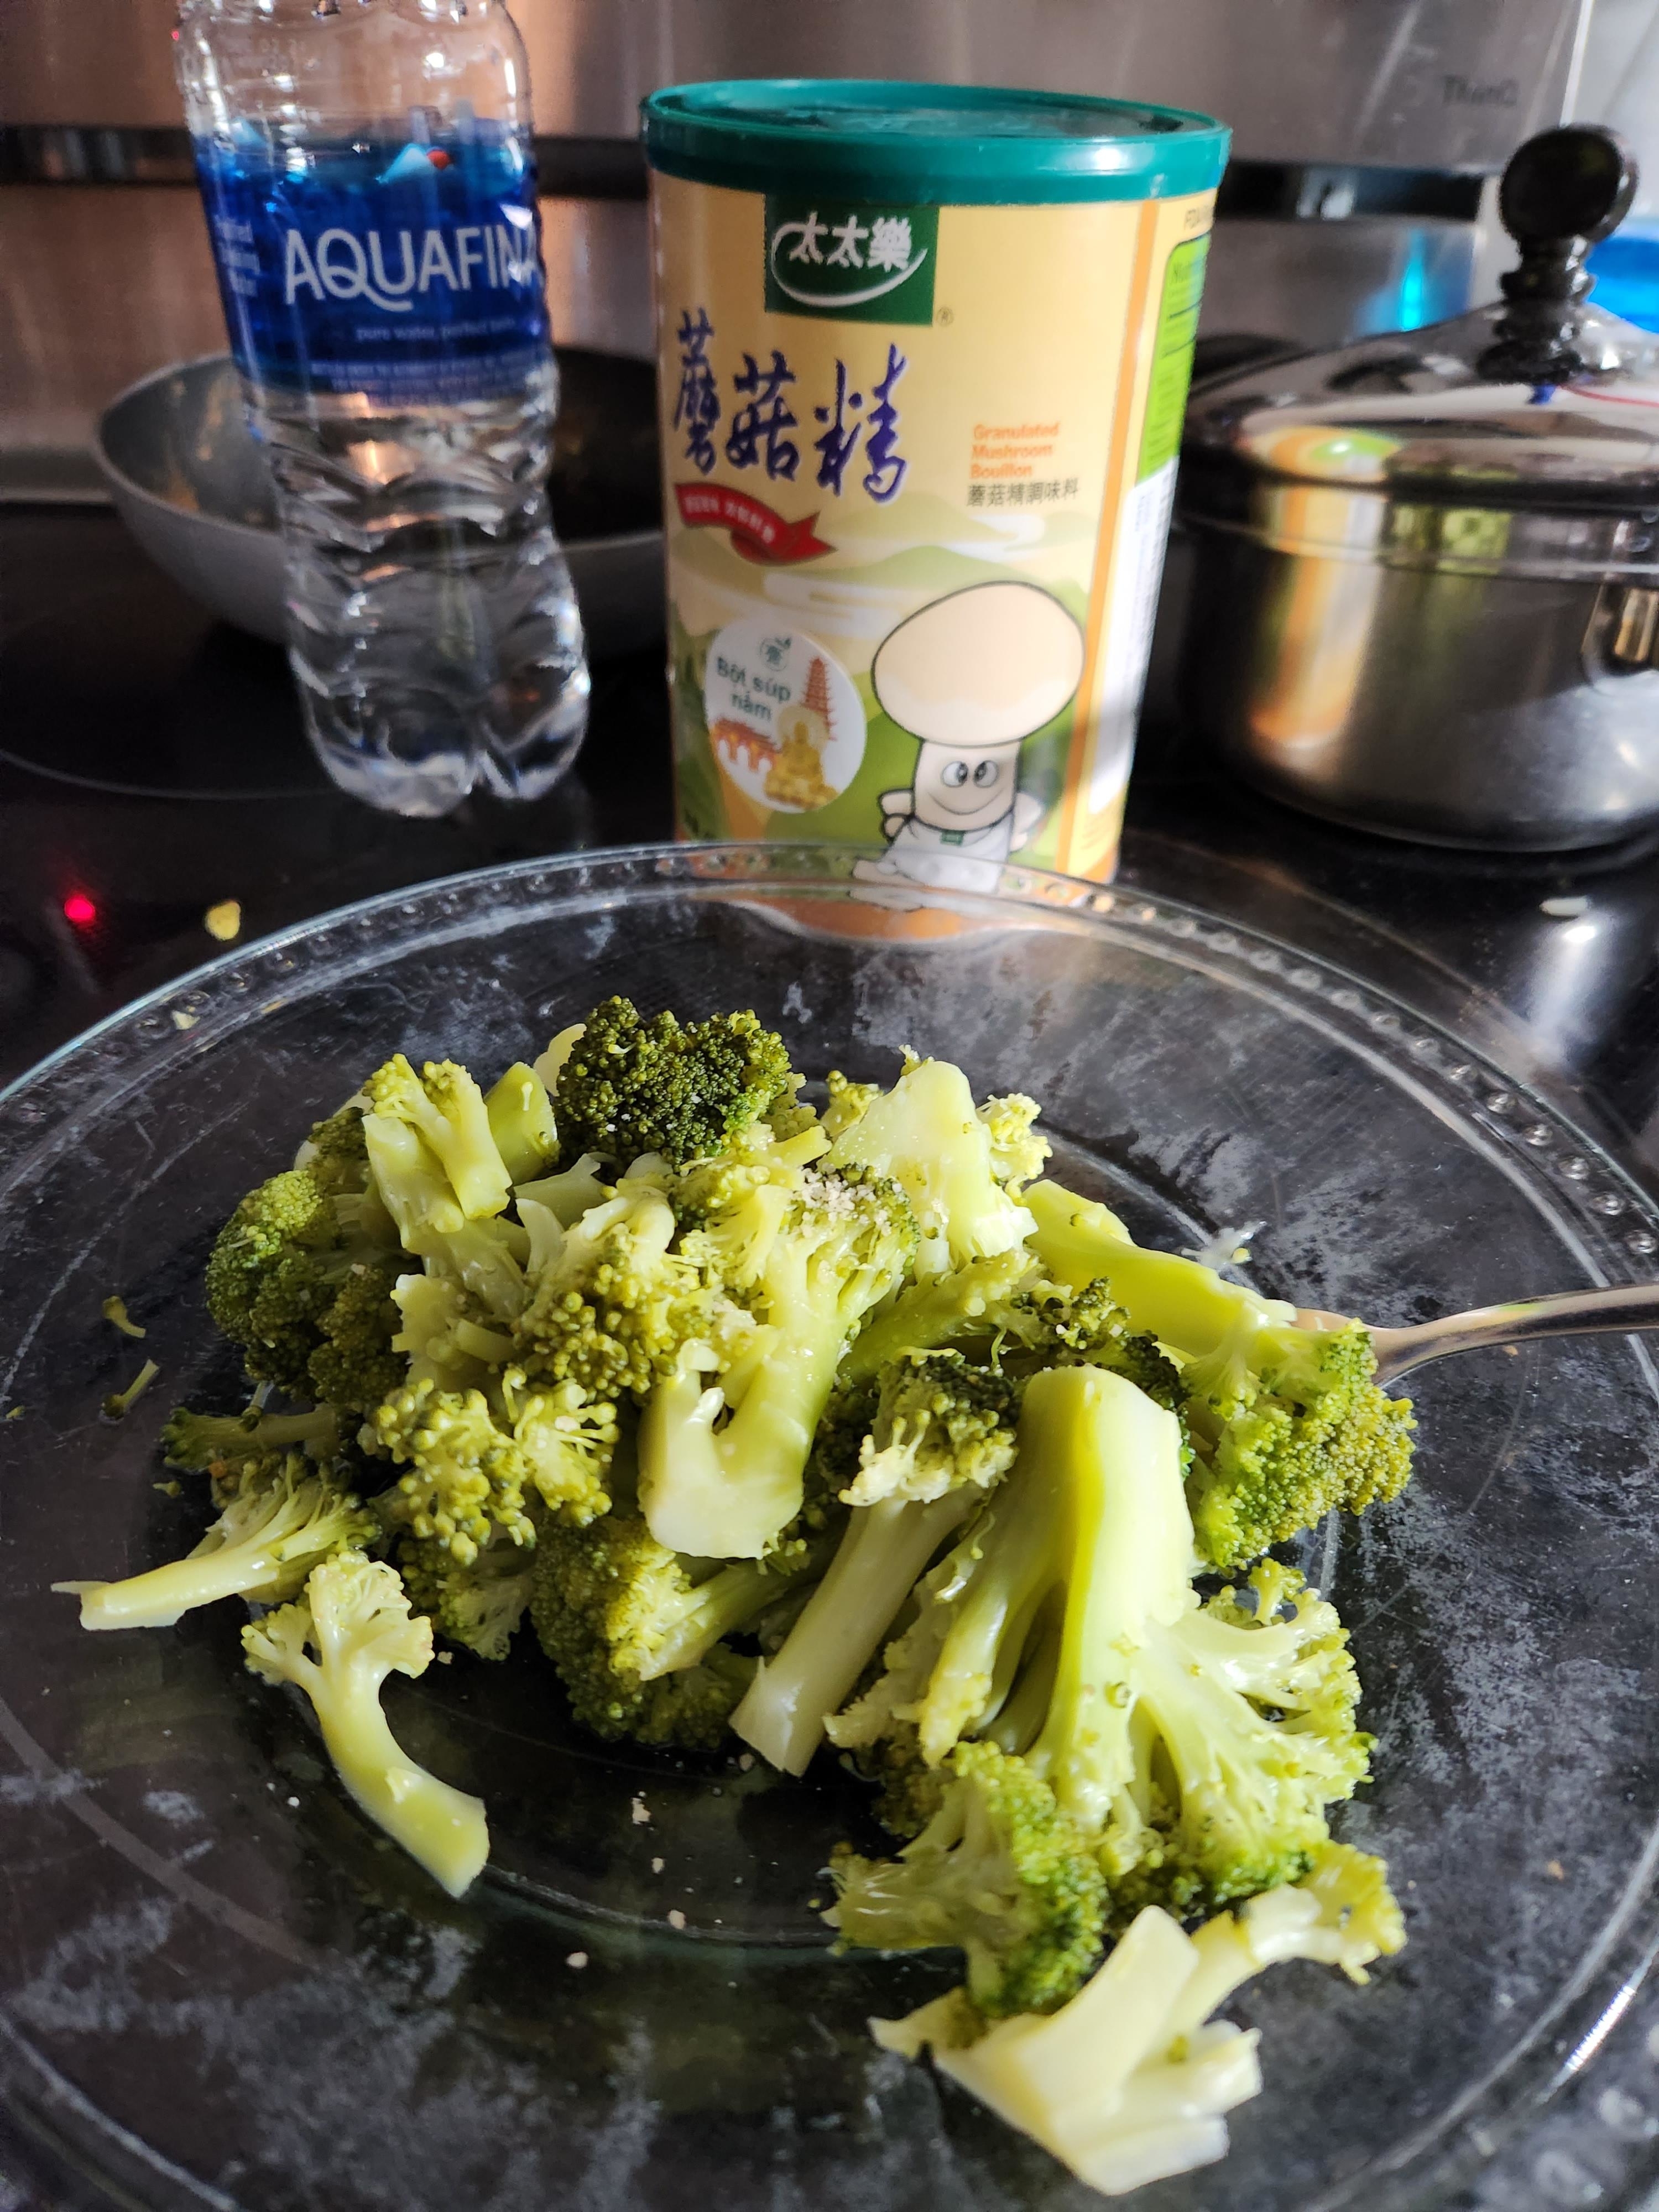 a plate of overcooked broccoli